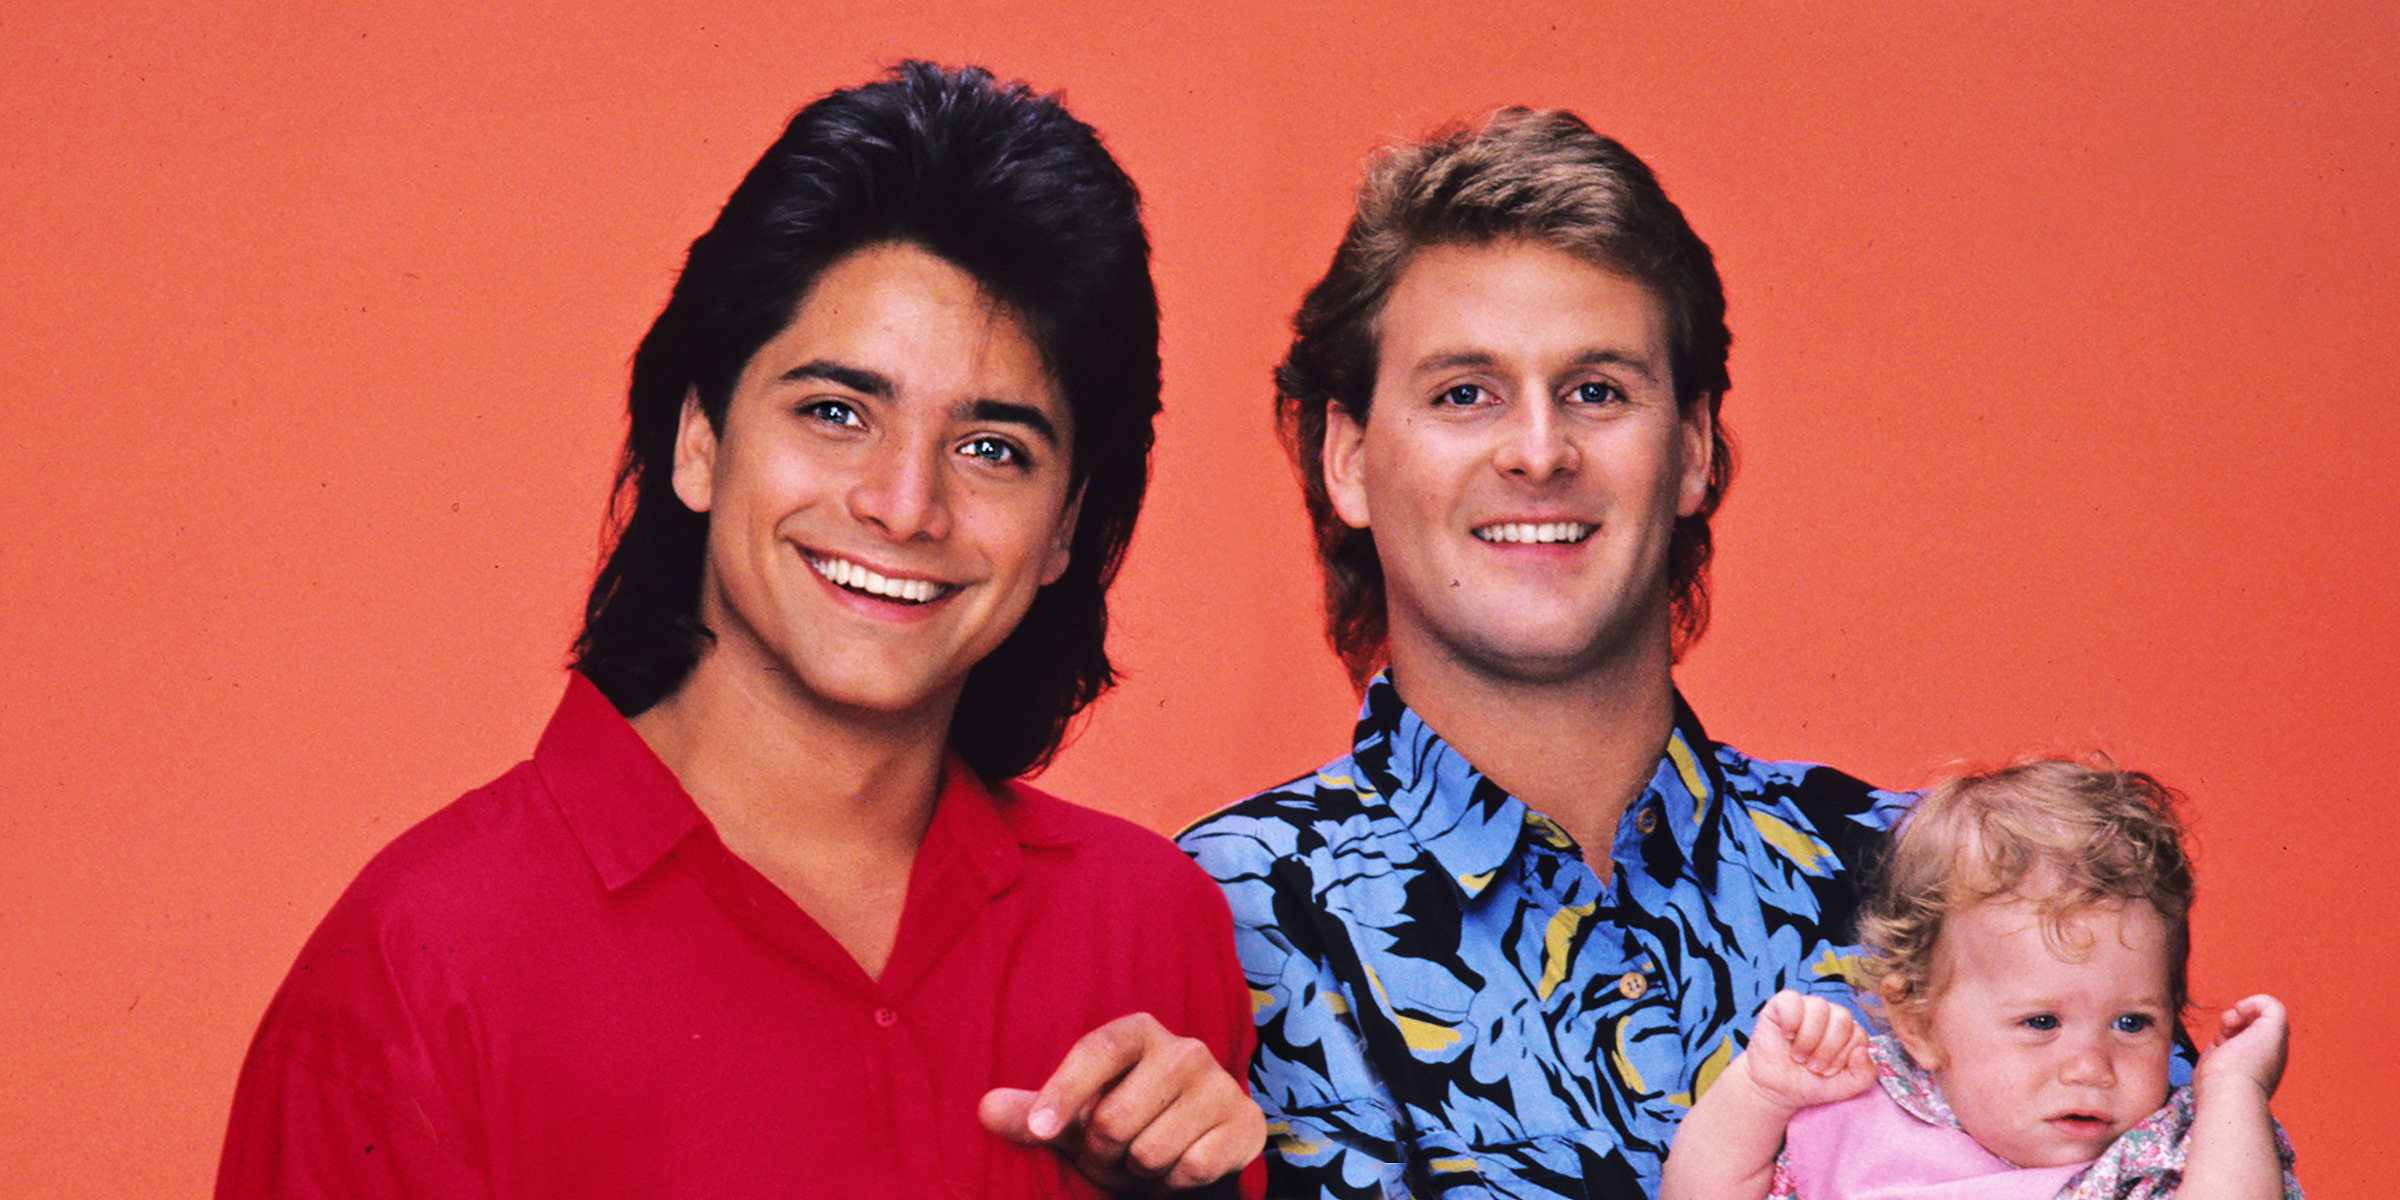 Dave Coulier and John Stamos on the Set of "Full House" | Source: Getty Images